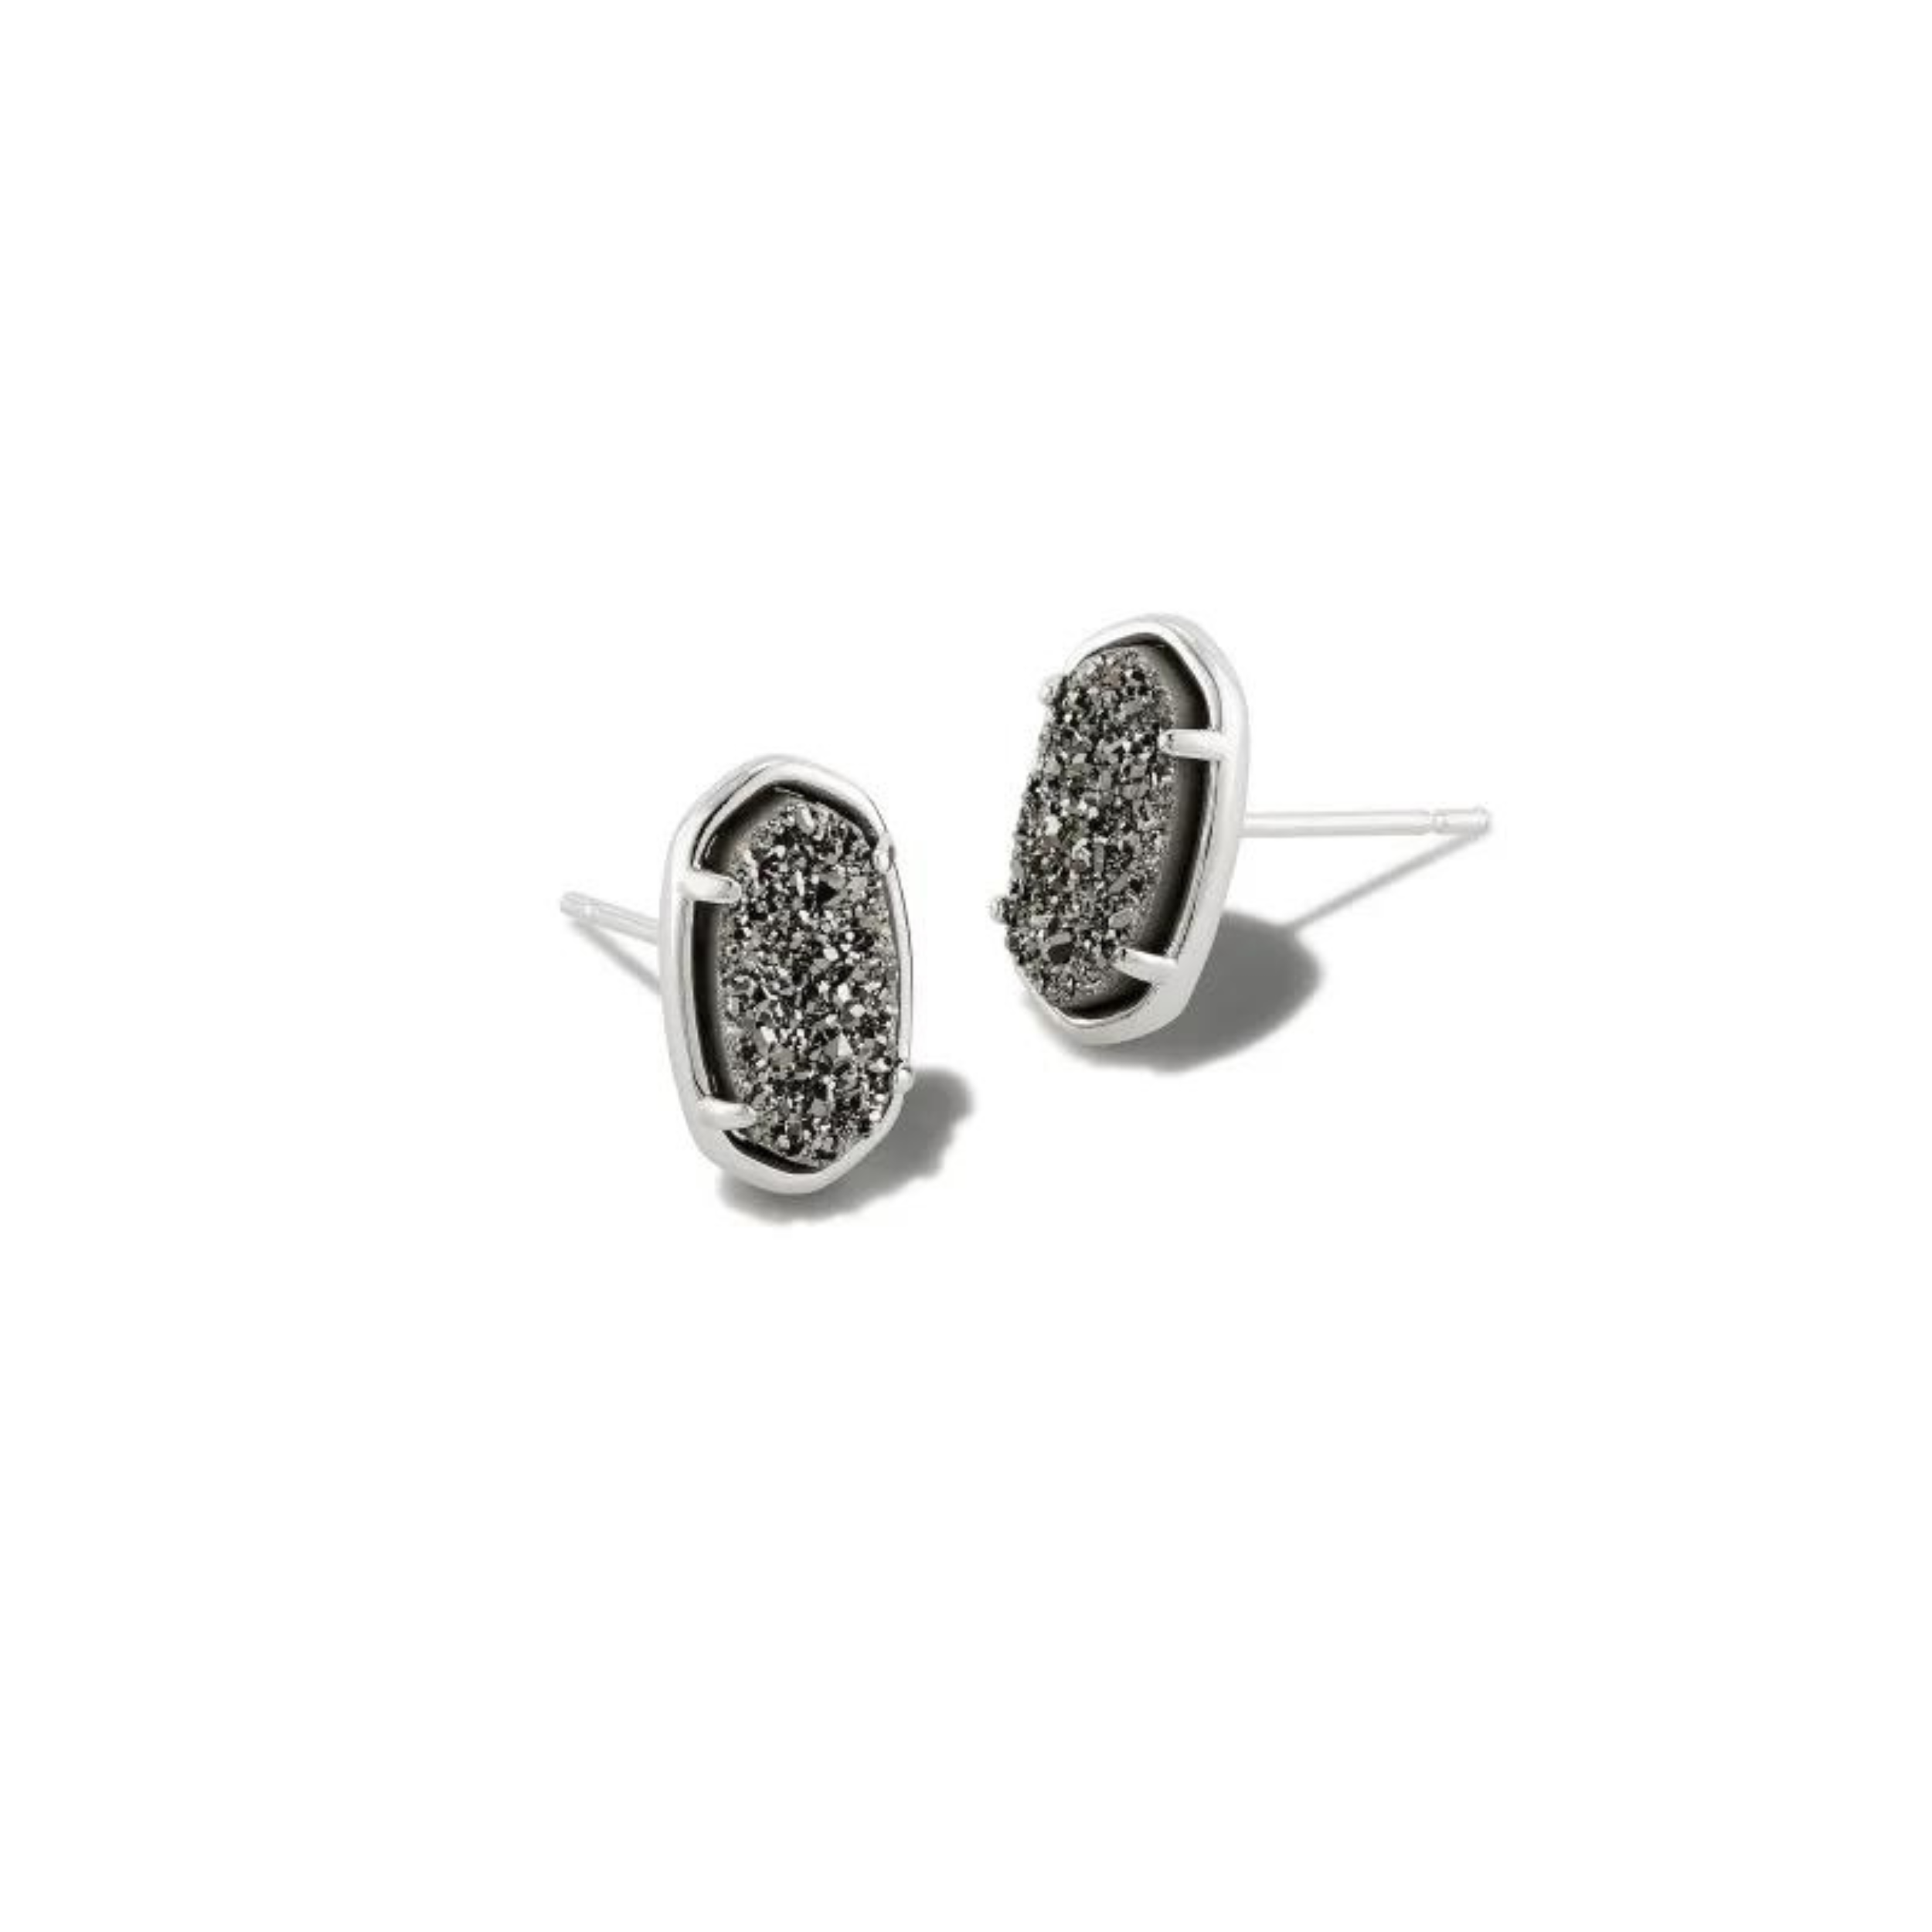 Silver stud earrings with platinum drusy stone pictured on a white background.